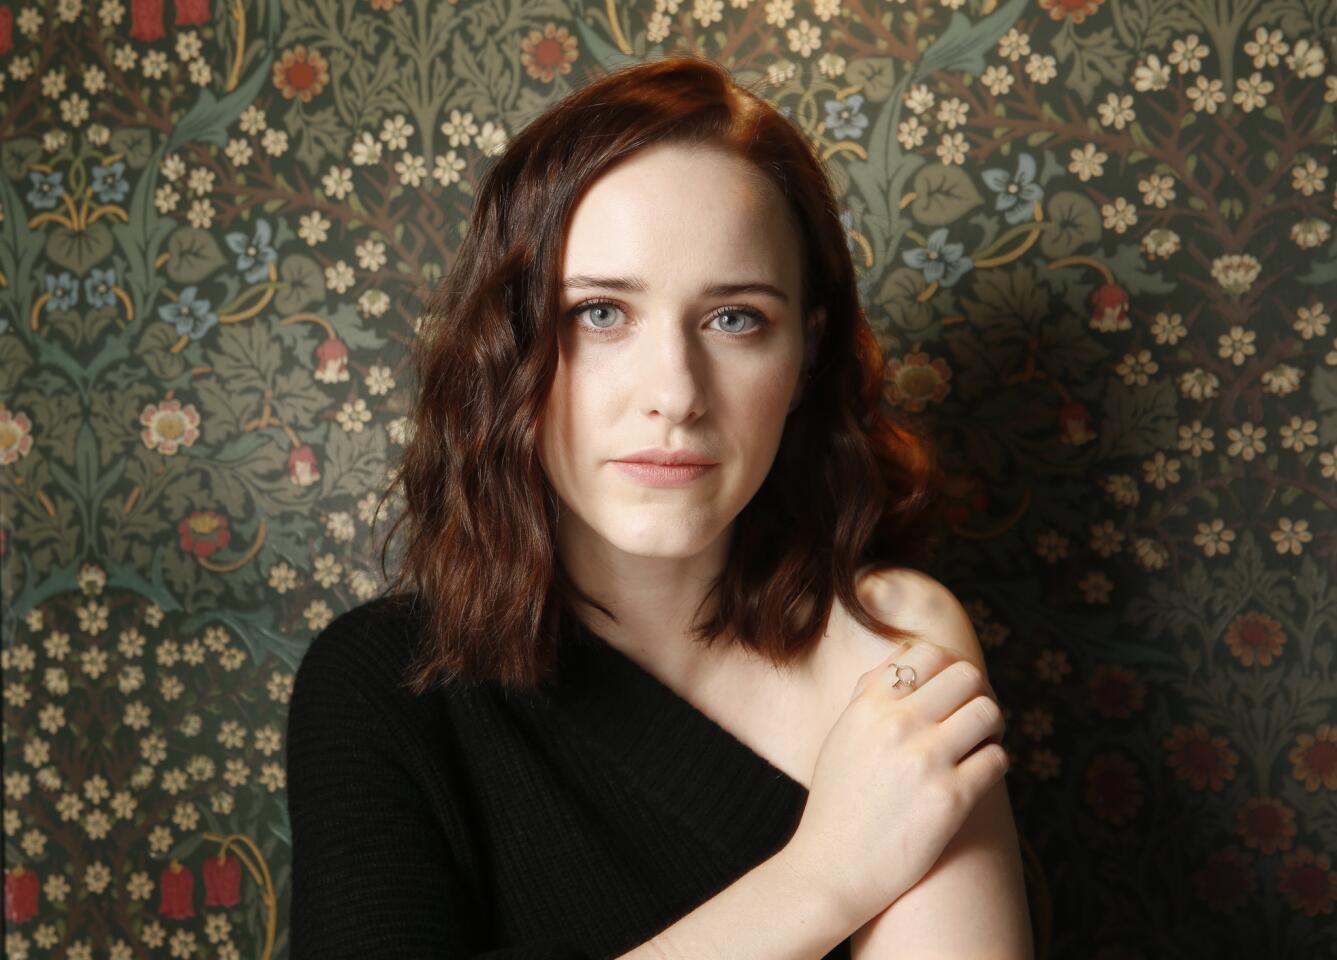 Celebrity portraits by The Times | Rachel Brosnahan